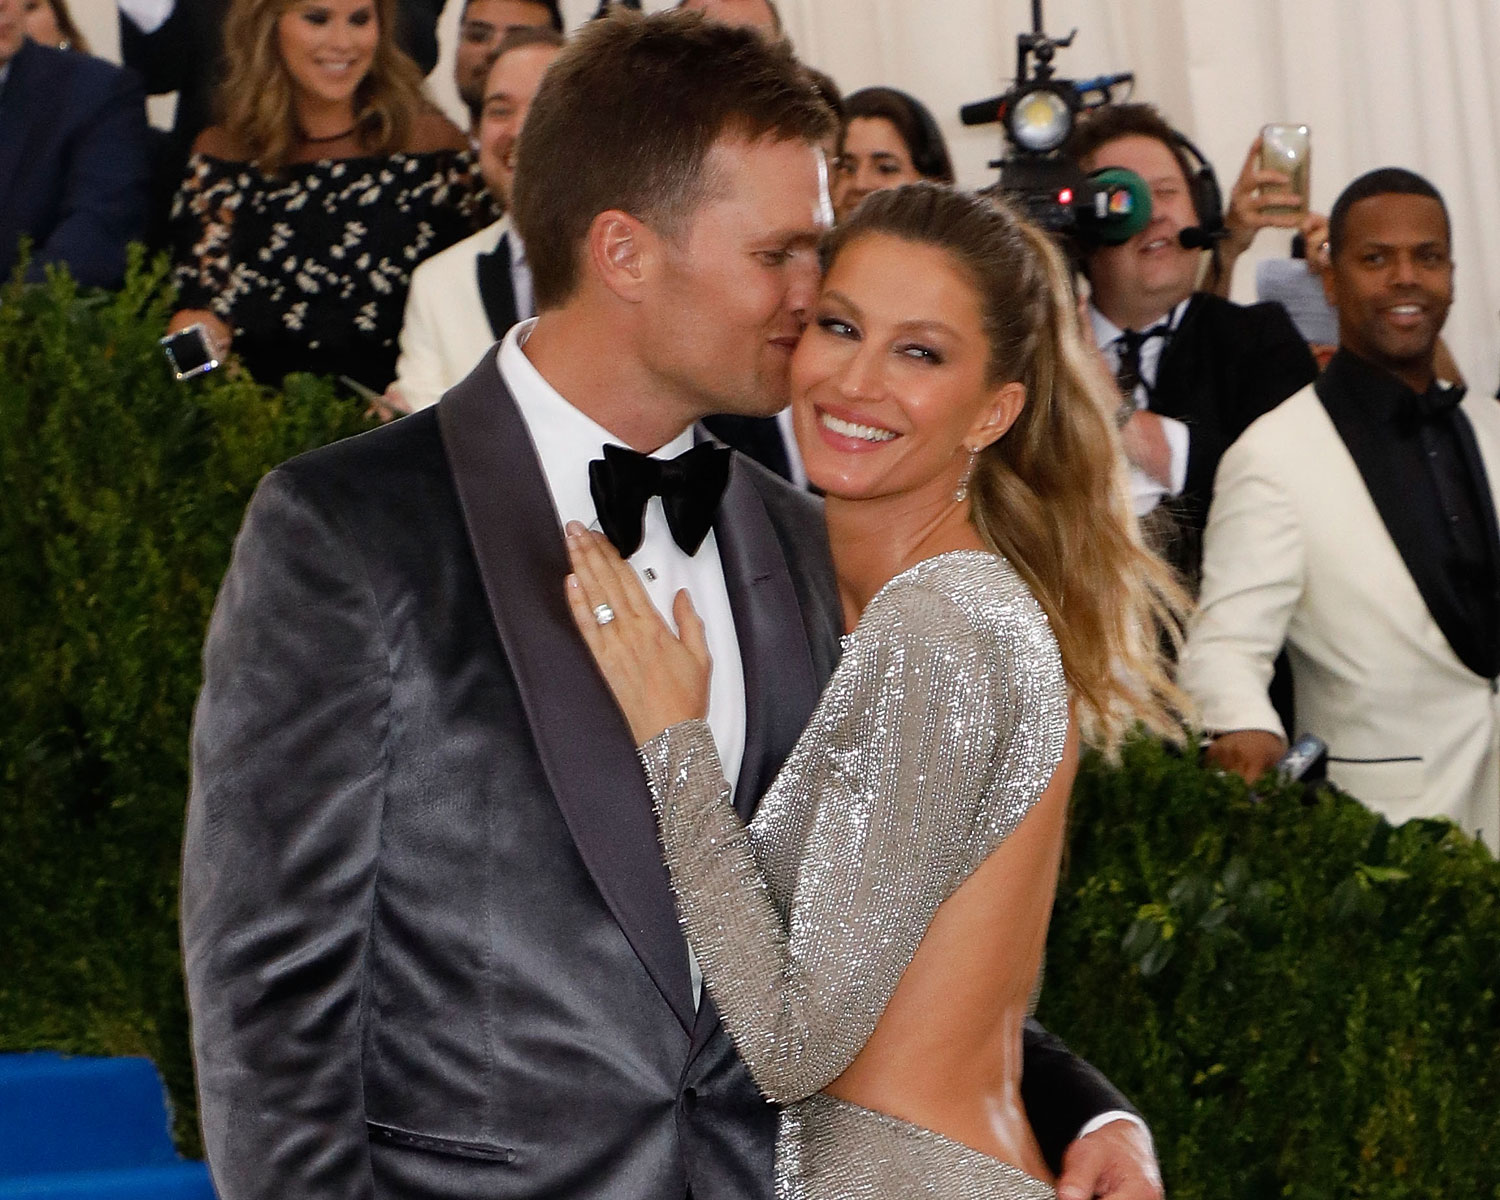 Tom Brady Reveals Intimate Secret Of Him And Gisele! Know What He Shared